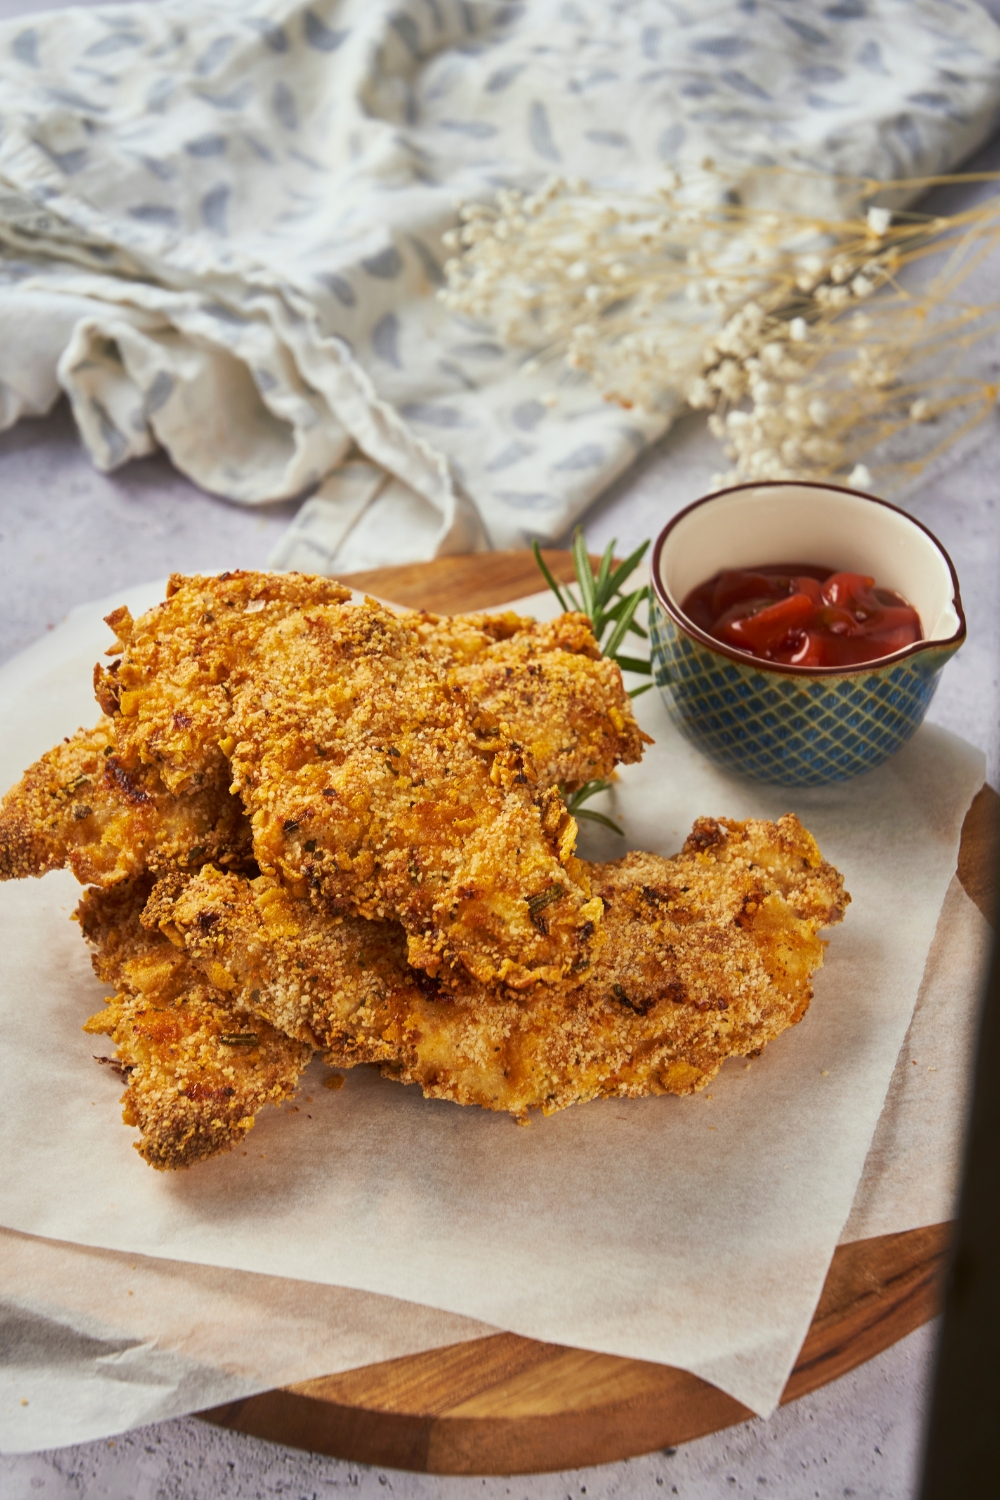 Zaxby's chicken fingers piled three-high on parchment paper on top of a wooden board with a bowl of ketchup.